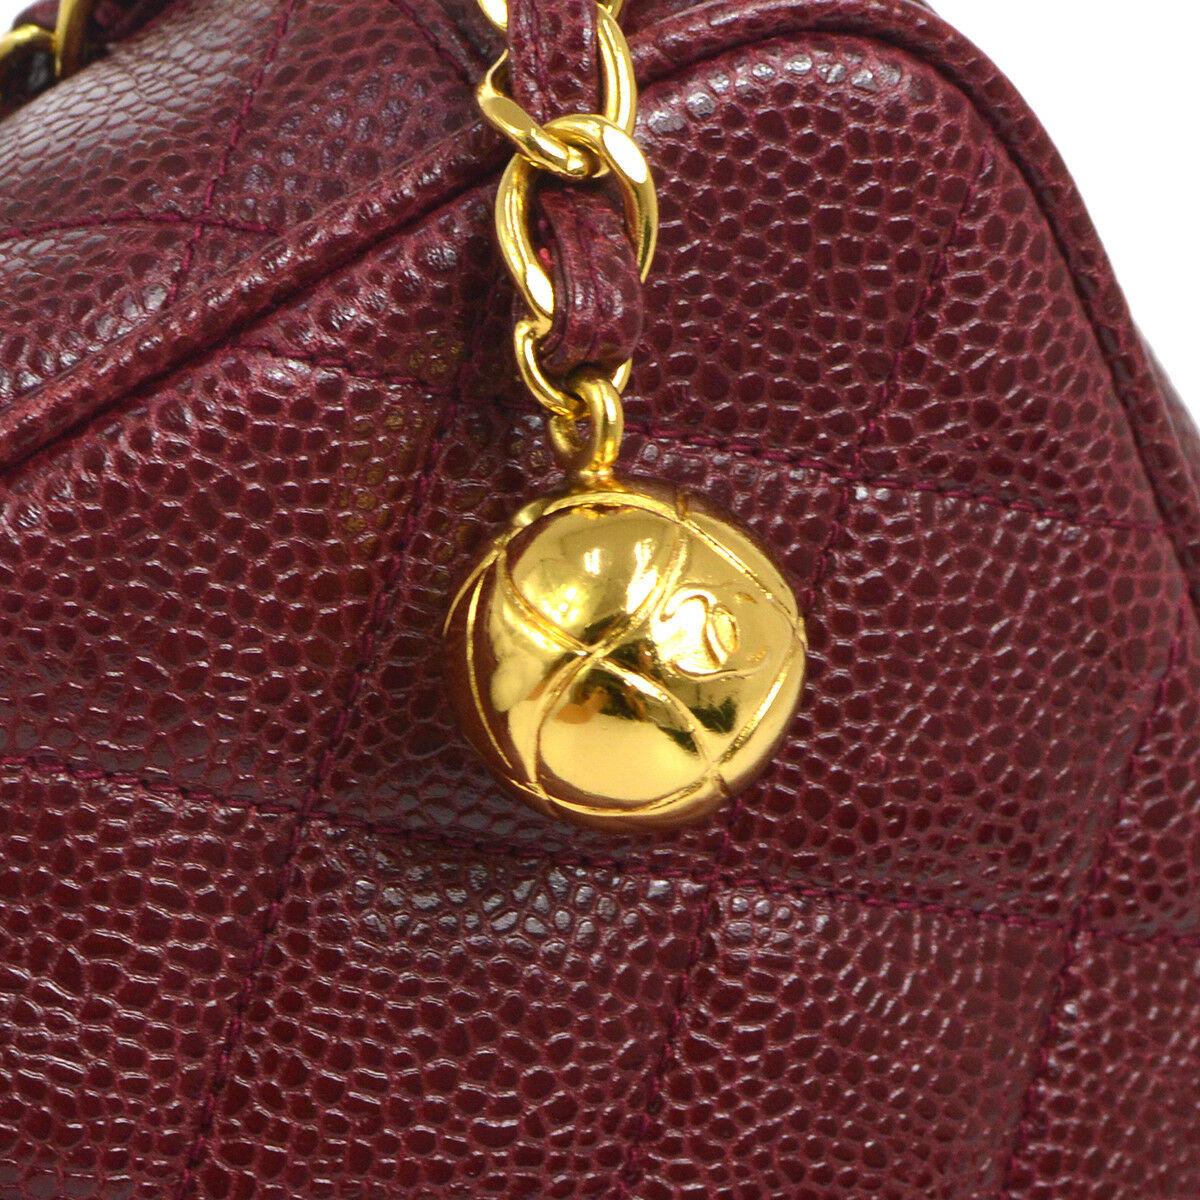 Chanel Burgundy Lizard Exotic Leather Small Evening Gold Camera Shoulder Bag in Box

Lizard
Gold tone hardware
Zipper closure
Leather lining
Date code present
Shoulder strap drop 19.5